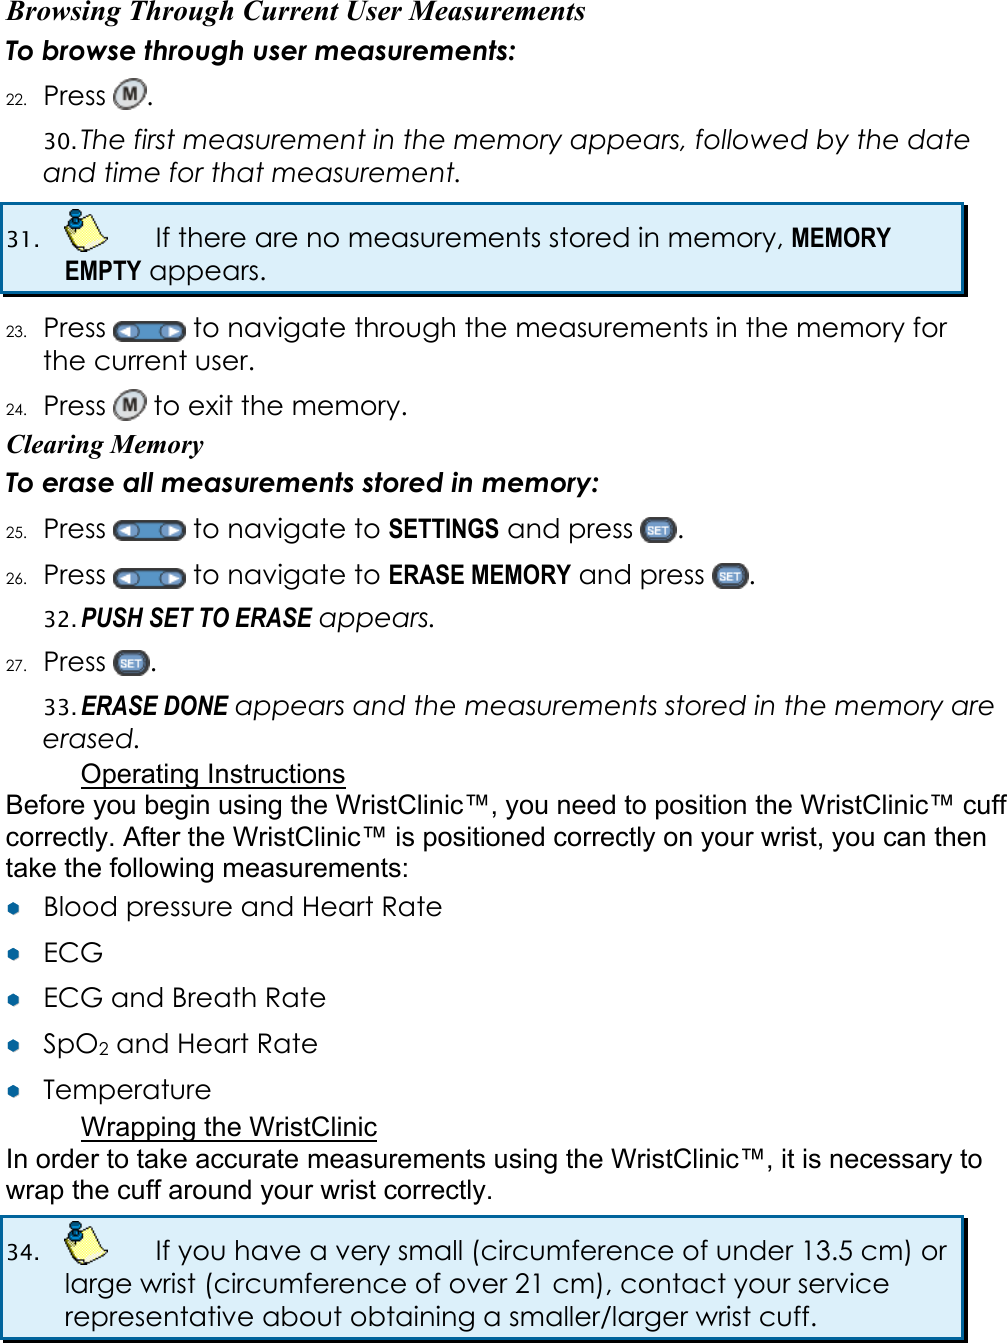 Browsing Through Current User Measurements To browse through user measurements: 22. Press  .  30. The first measurement in the memory appears, followed by the date and time for that measurement. 31.    If there are no measurements stored in memory, MEMORY EMPTY appears. 23. Press   to navigate through the measurements in the memory for the current user. 24. Press   to exit the memory. Clearing Memory To erase all measurements stored in memory: 25. Press   to navigate to SETTINGS and press  . 26. Press   to navigate to ERASE MEMORY and press  .  32. PUSH SET TO ERASE appears.  27. Press  . 33. ERASE DONE appears and the measurements stored in the memory are erased. Operating Instructions Before you begin using the WristClinic™, you need to position the WristClinic™ cuff correctly. After the WristClinic™ is positioned correctly on your wrist, you can then take the following measurements: ¥¥  Blood pressure and Heart Rate ¥¥  ECG ¥¥  ECG and Breath Rate ¥¥  SpO2 and Heart Rate ¥¥  Temperature Wrapping the WristClinic In order to take accurate measurements using the WristClinic™, it is necessary to wrap the cuff around your wrist correctly.  34.    If you have a very small (circumference of under 13.5 cm) or large wrist (circumference of over 21 cm), contact your service representative about obtaining a smaller/larger wrist cuff.  